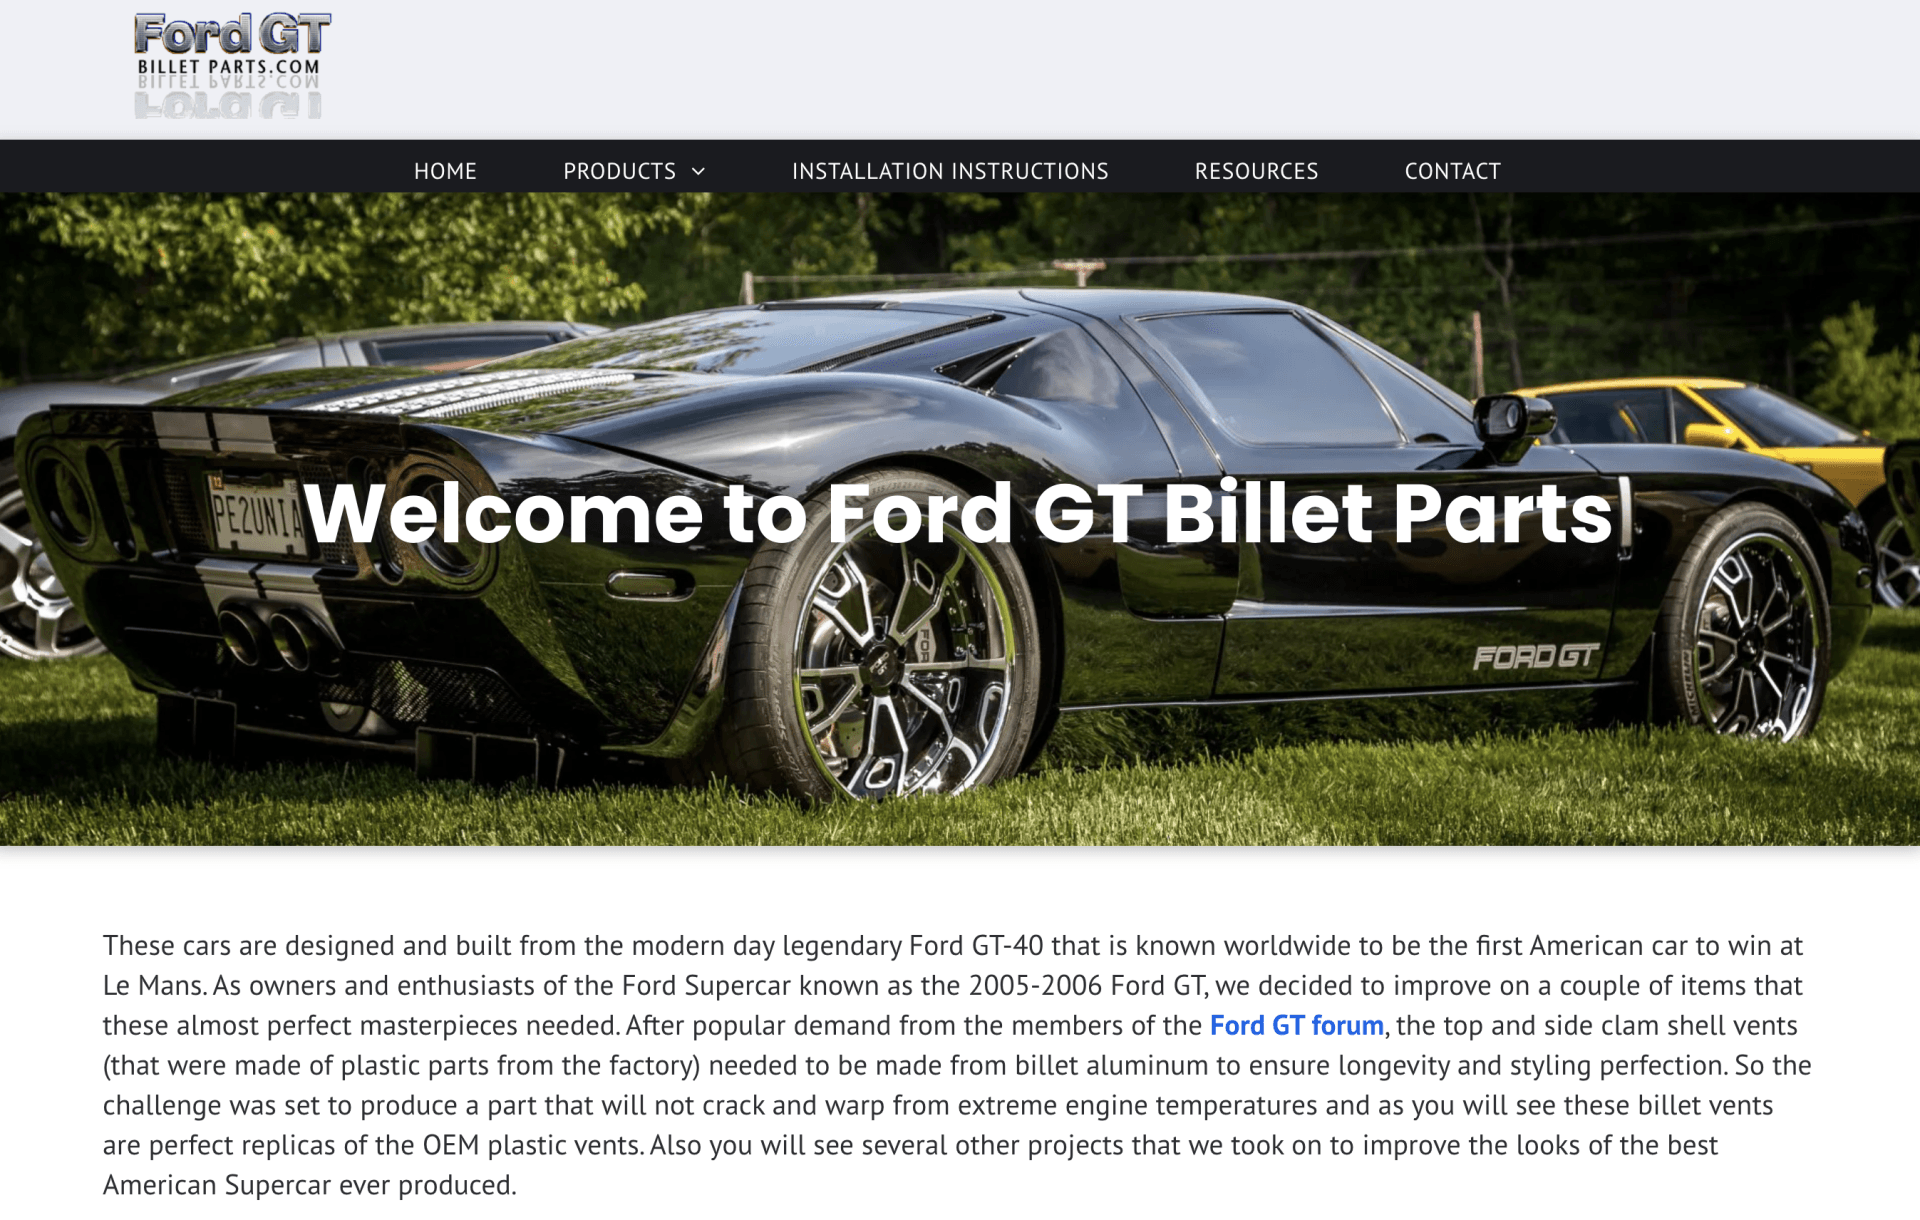 A black ford gt billet parts car is parked in the grass.